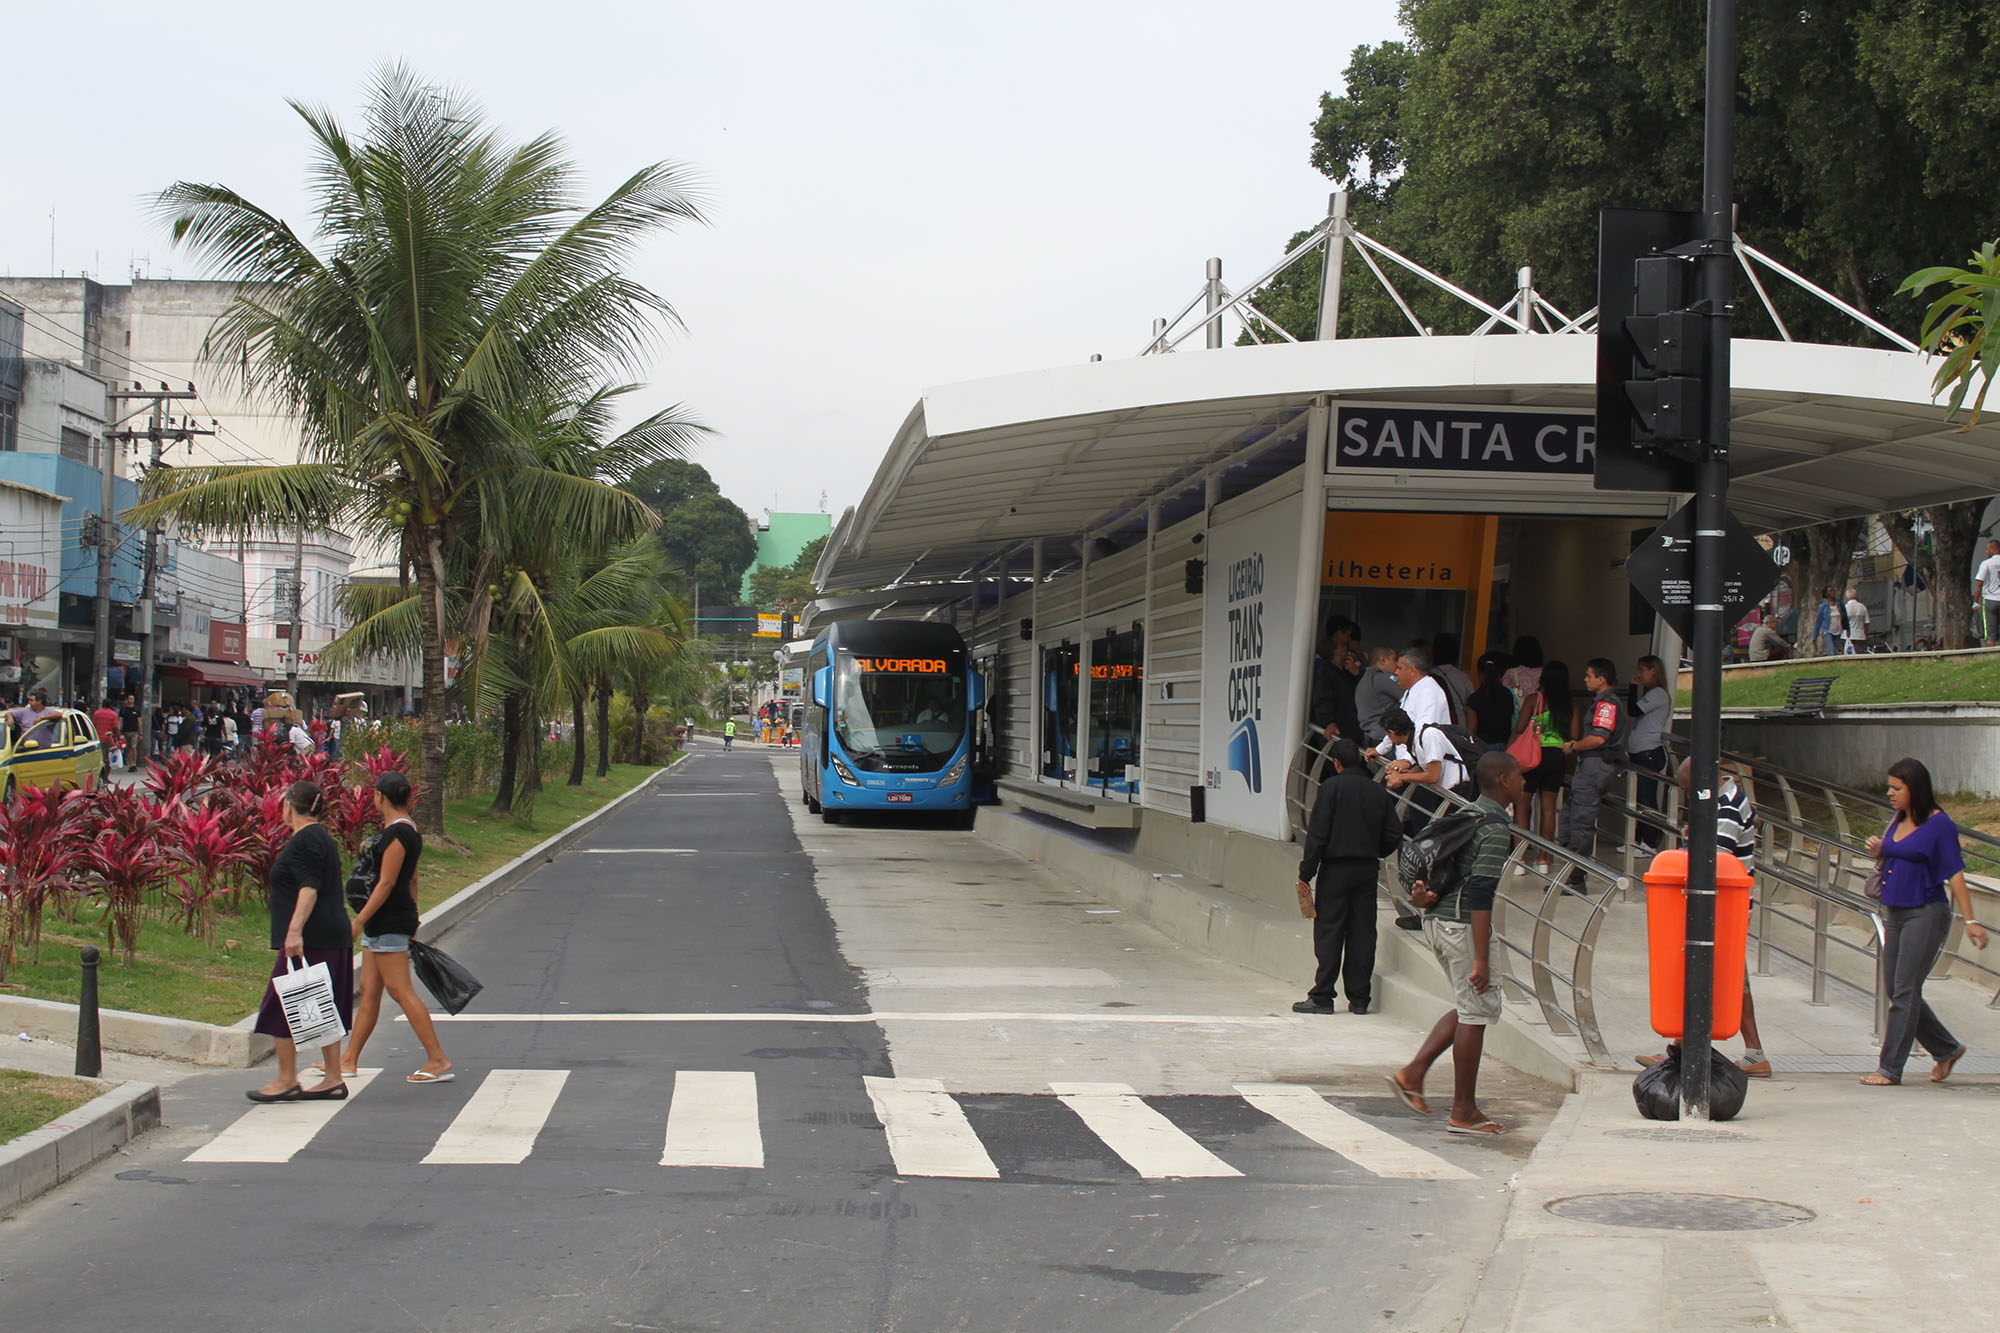 Fig. 22.49 The TransOeste in Rio de Janeiro provides passing lanes at stations.